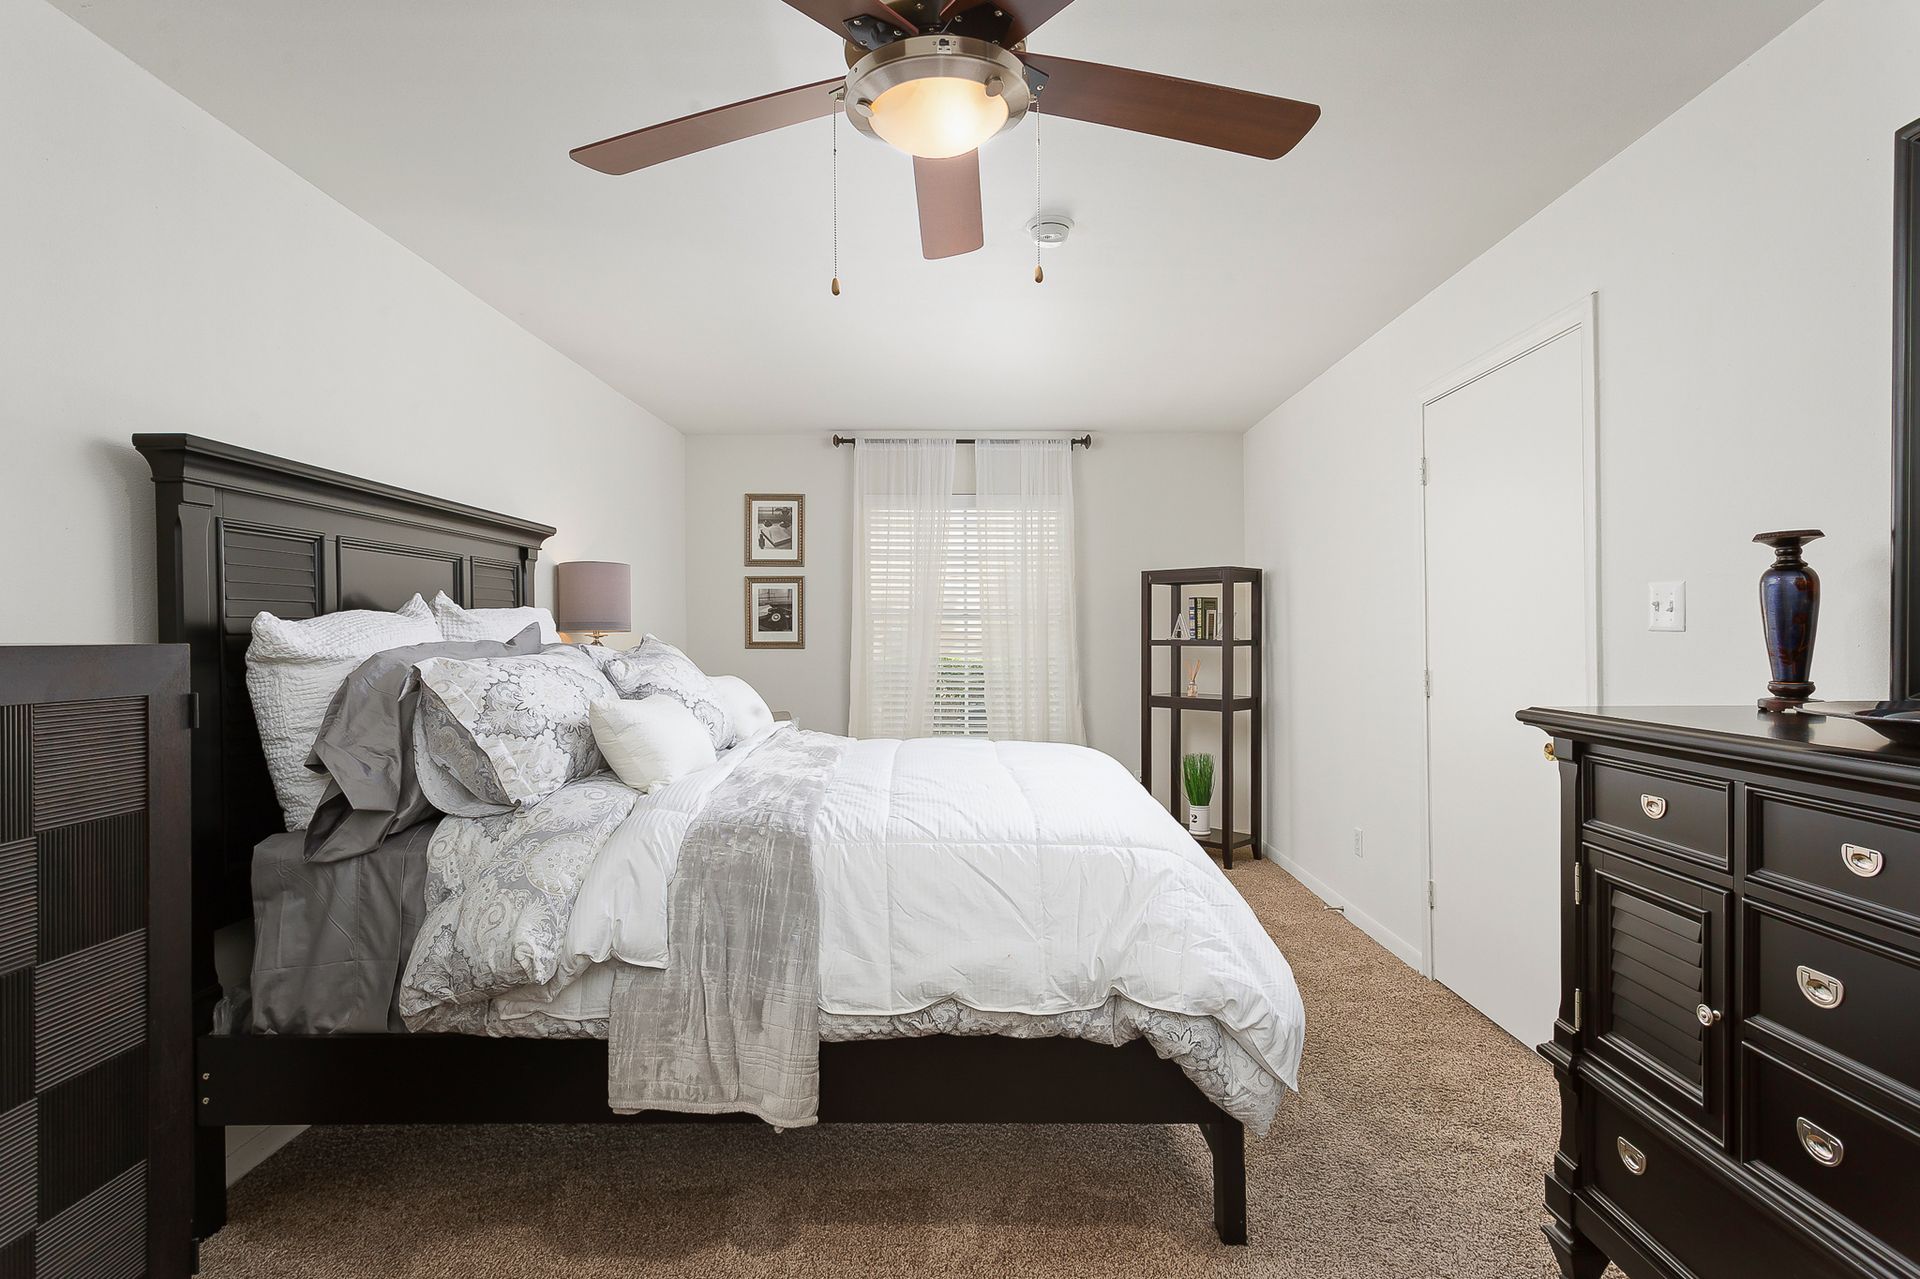 Furnished bedroom with carpet and ceiling fan